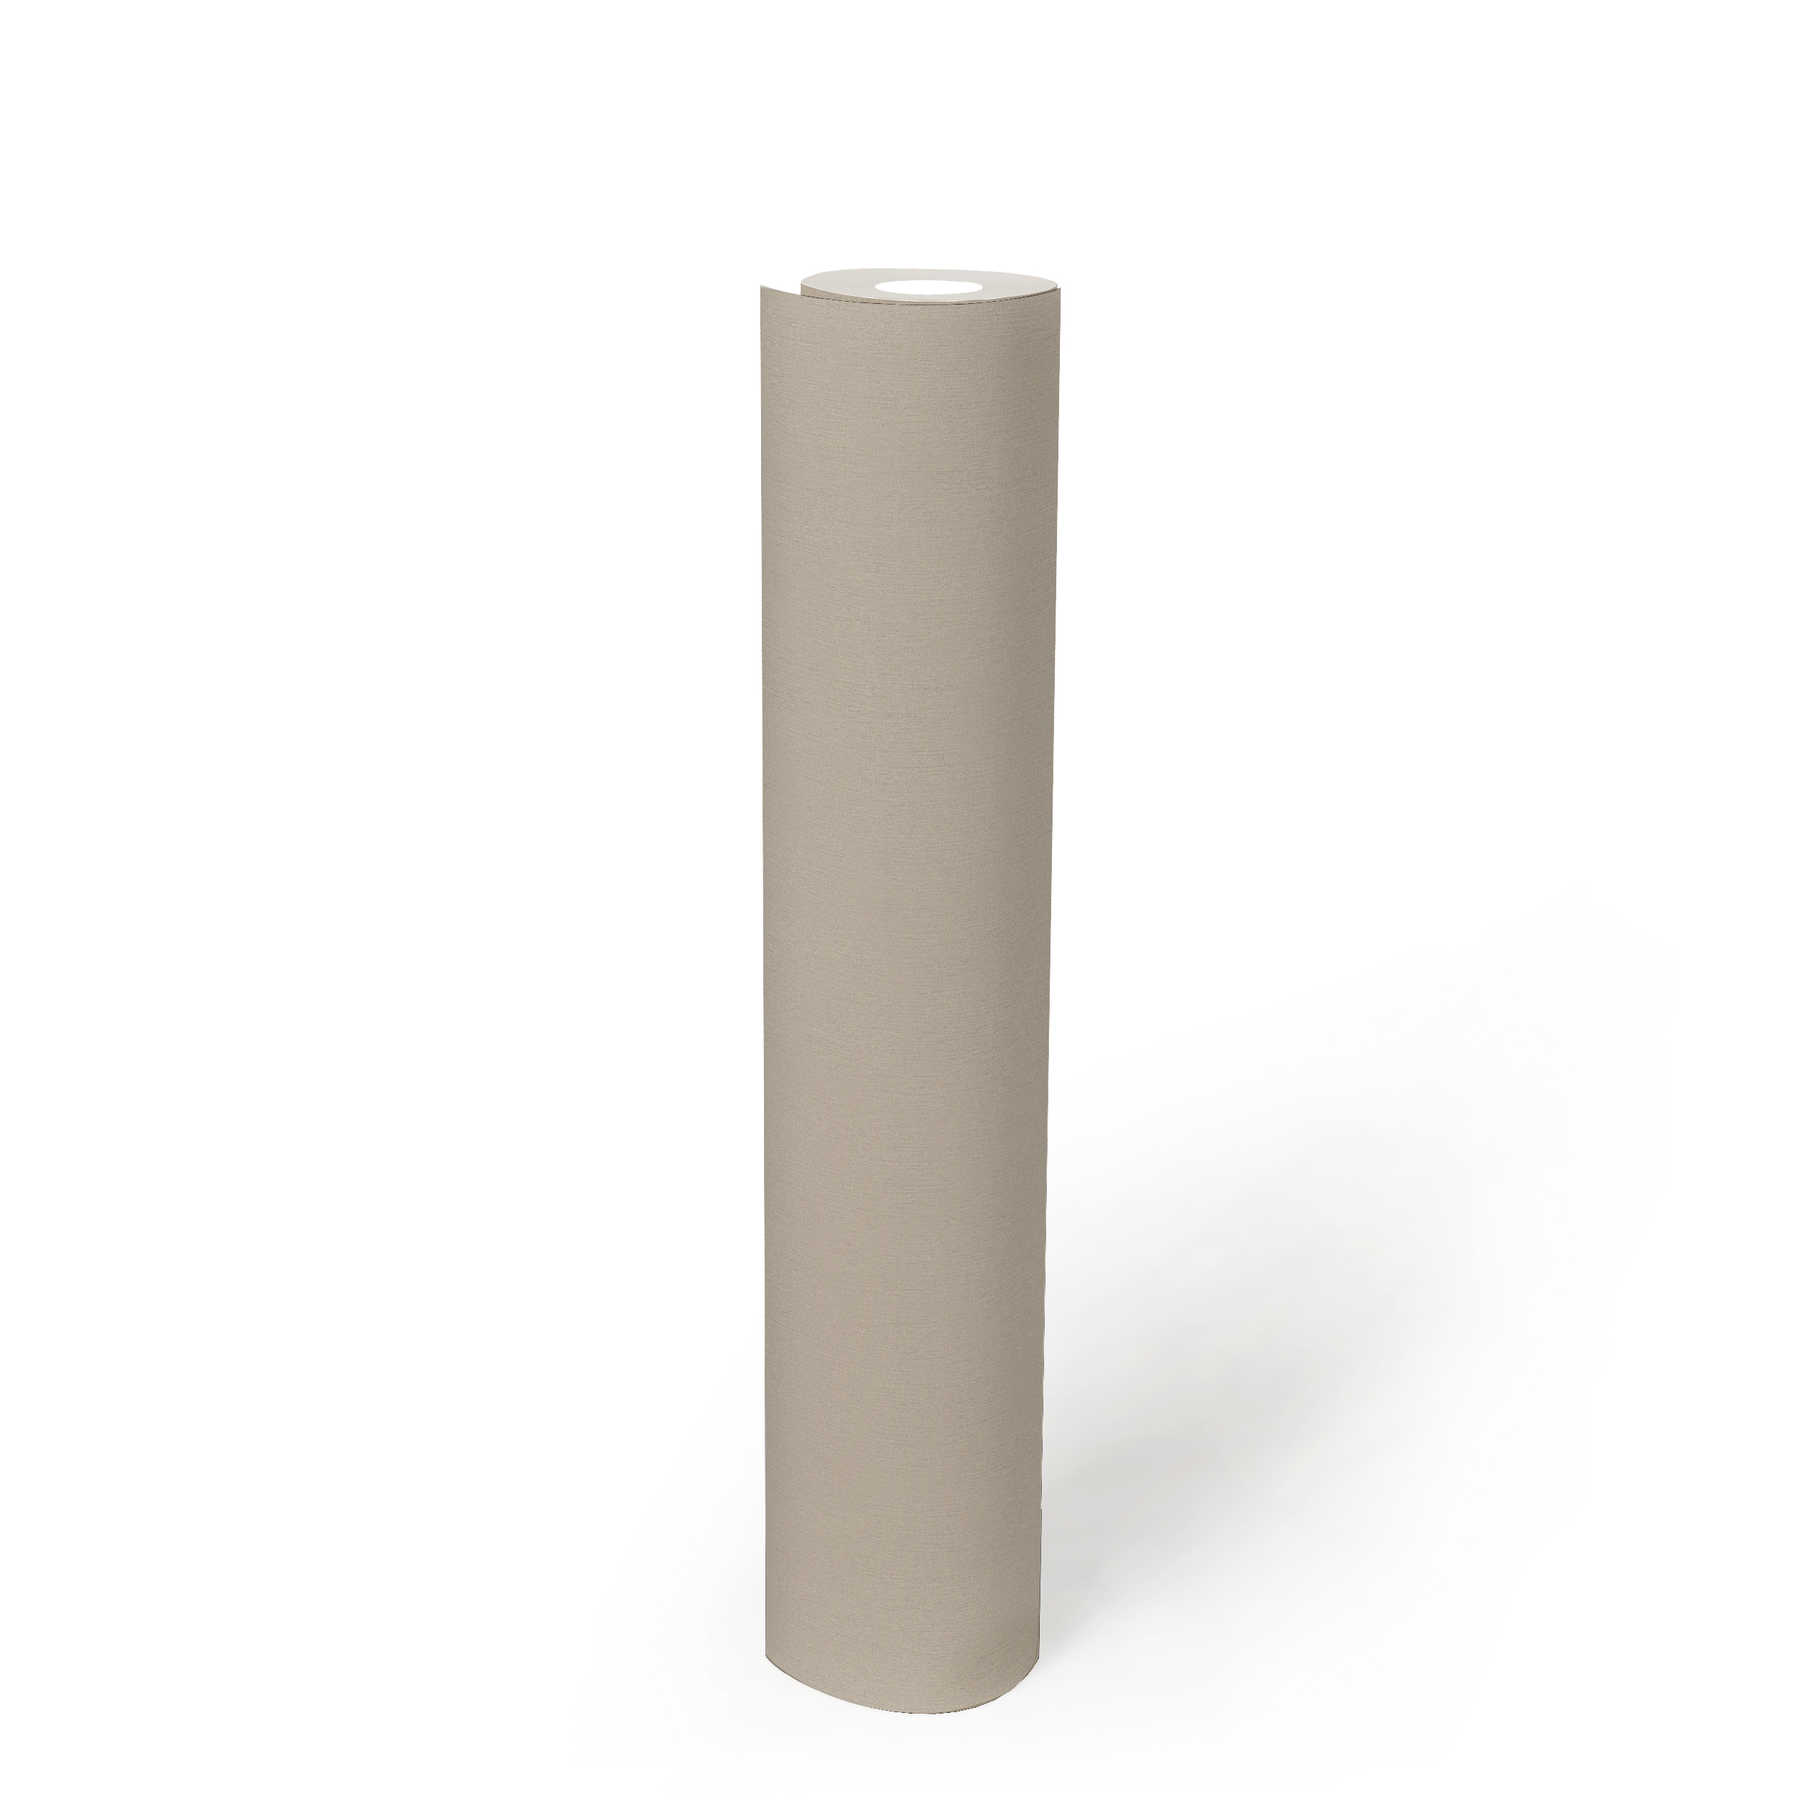             Non-woven wallpaper grey-brown light with smooth surface
        